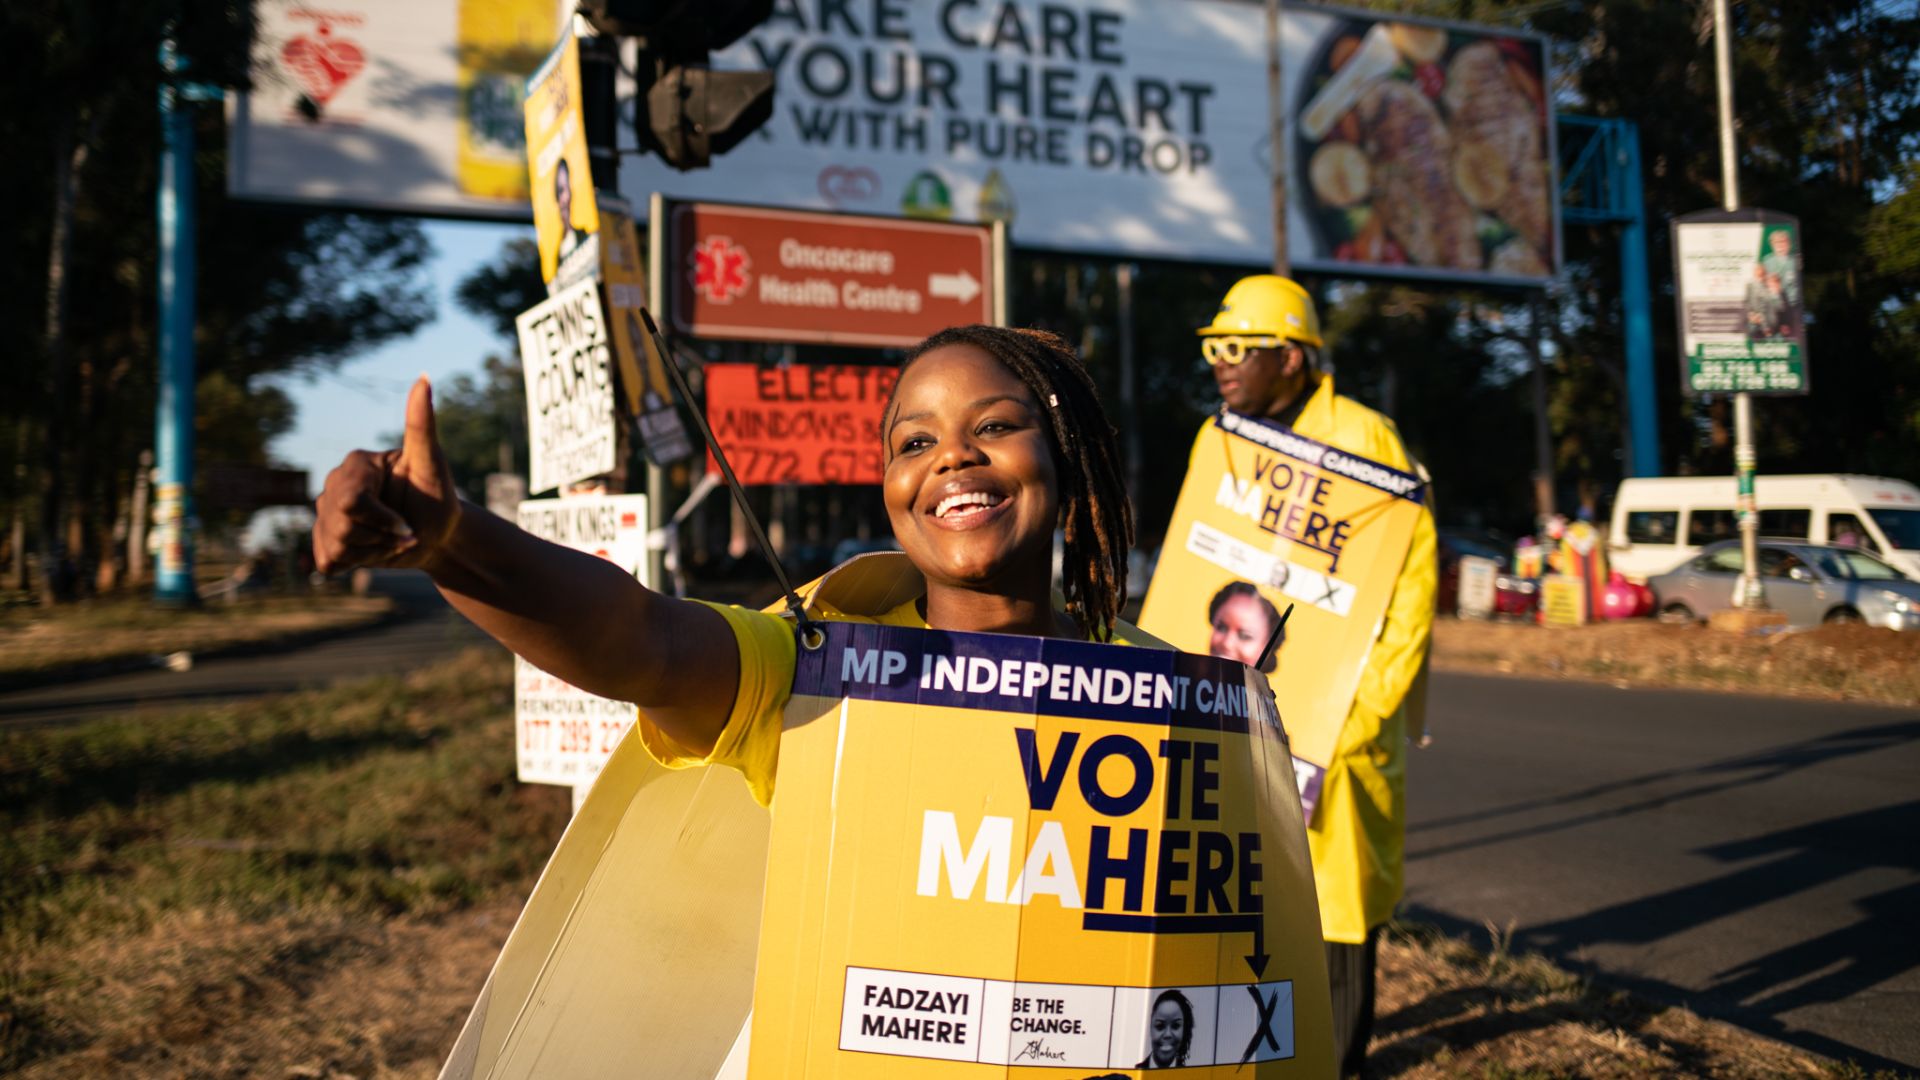 A photo of a woman wearing a yellow "Vote Mahre" sign and a man standing in the back wearing yellow clothes and holding a "Vote Mahre" sign.